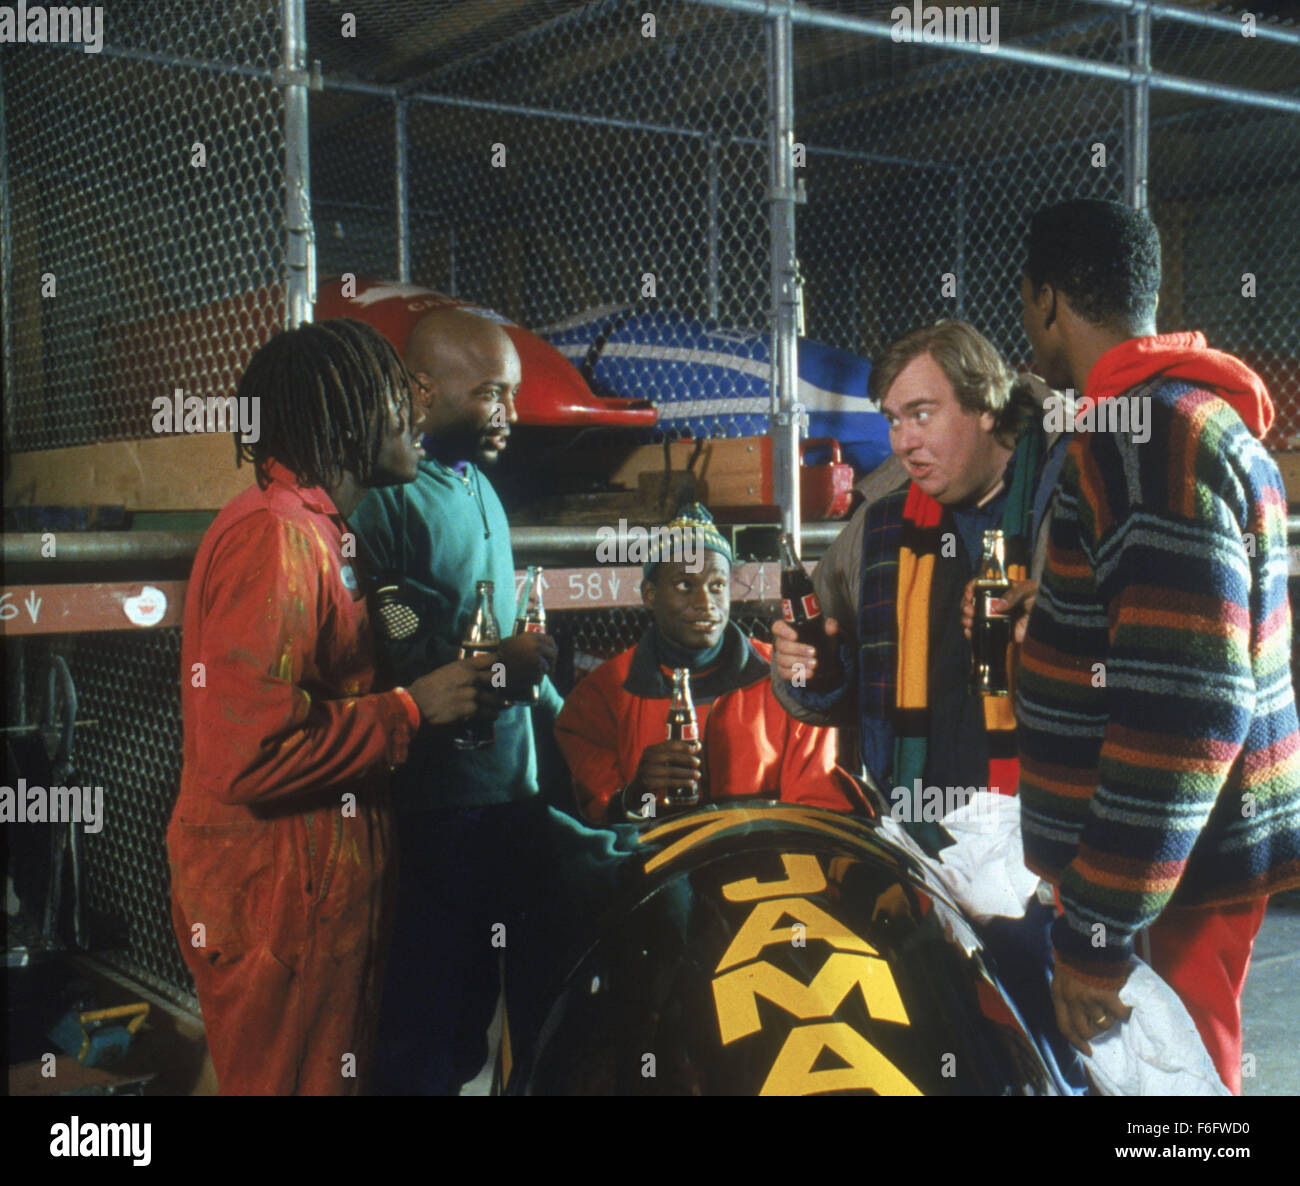 Oct 01, 1993;  Calagry, CANADA; Actor JOHN CANDY stars as Irving 'Irv' Blizter with LEON as Derice Bannock, DOUG E DOUG as Sanka Coffie, Rawle D.LEWIS as Junior Bevil and MALIK YOBA as yul Brenner in 'Cool Runnings.' Stock Photo